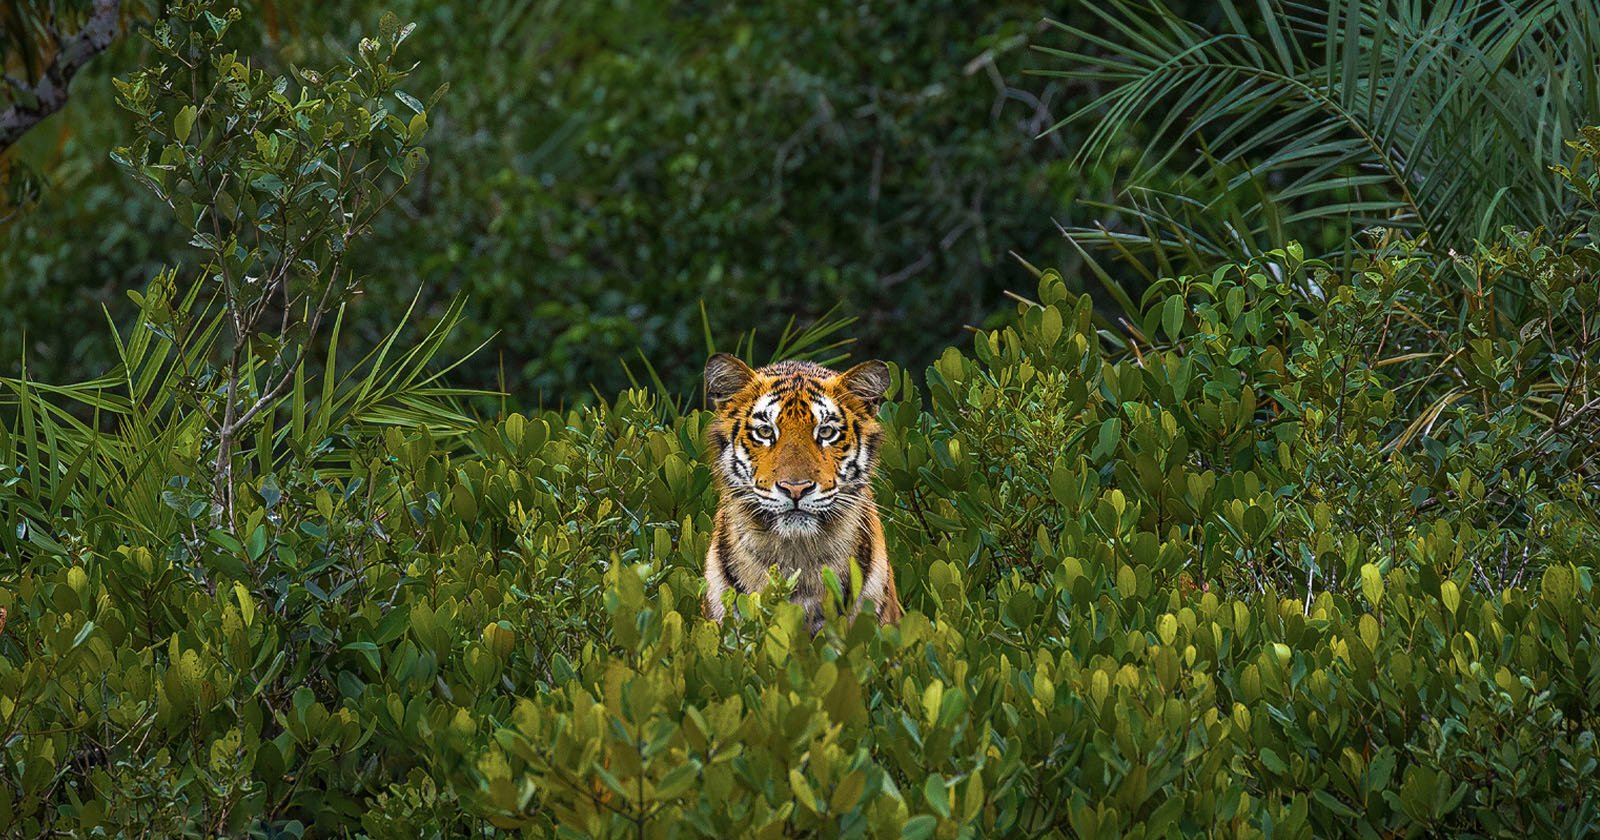 Dead-Eyed Tiger Staring Out From Mangrove Wins Photo Competition